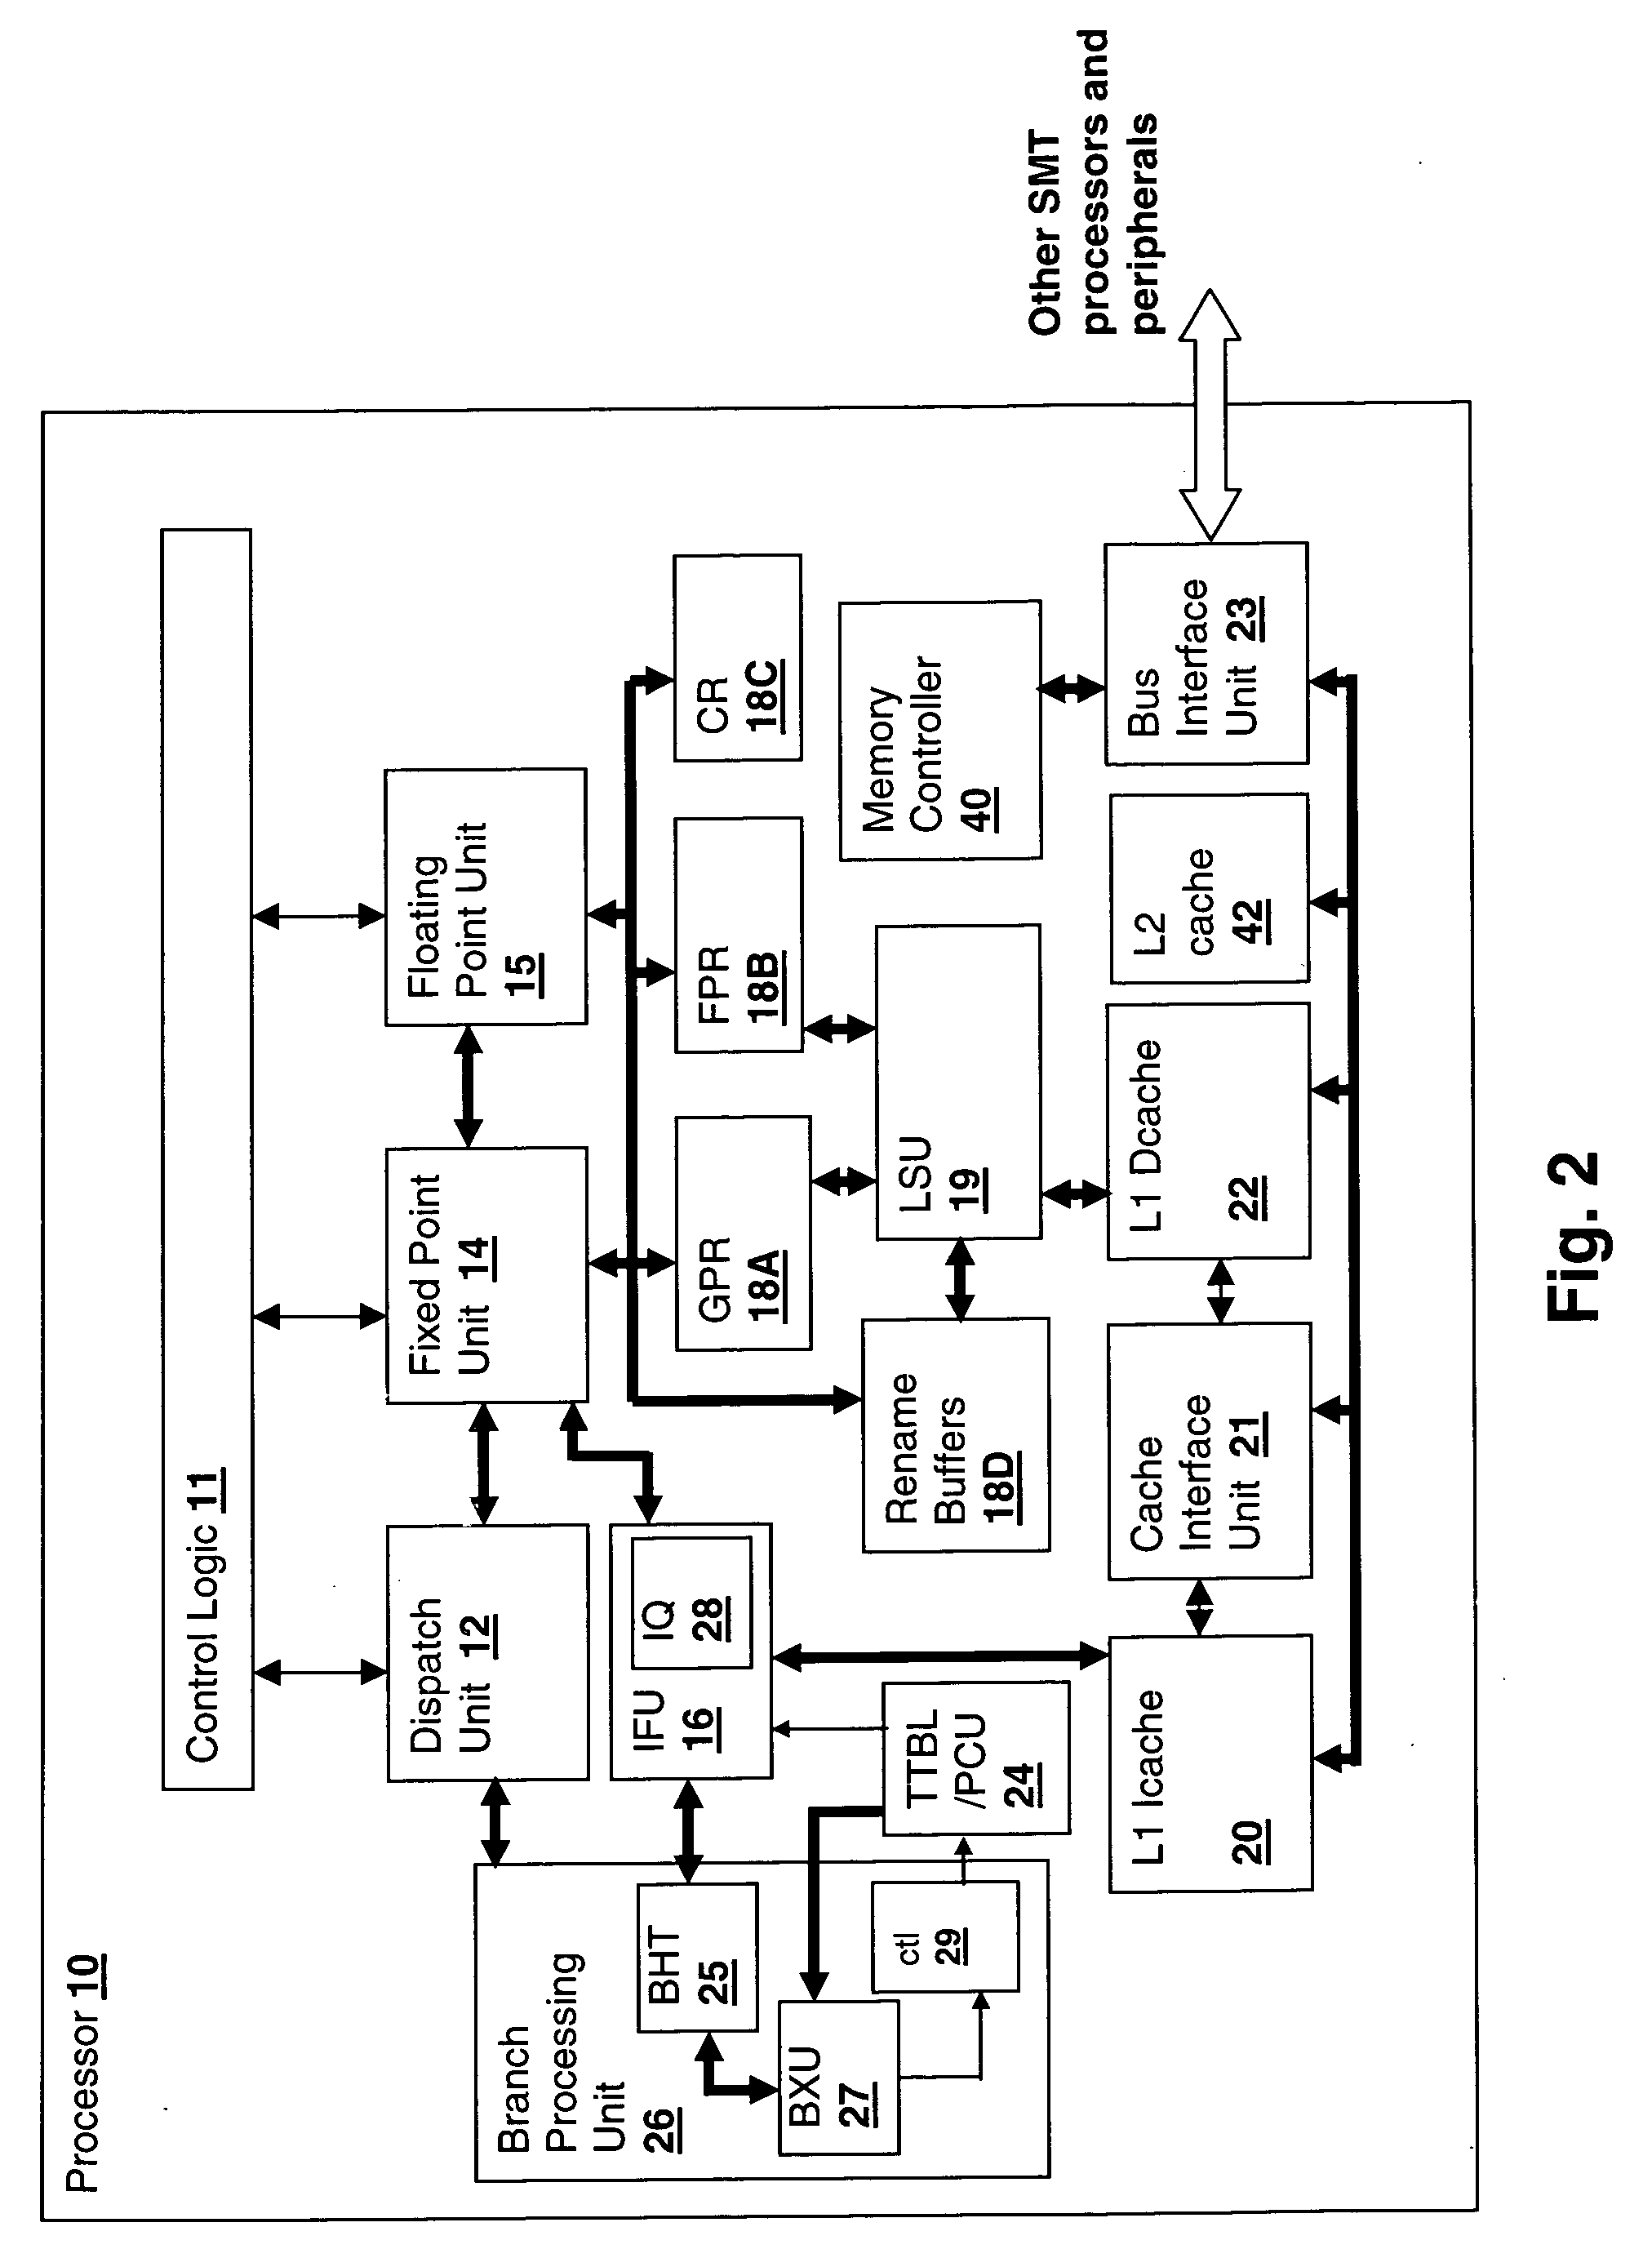 Method and logical apparatus for managing processing system resource use for speculative execution